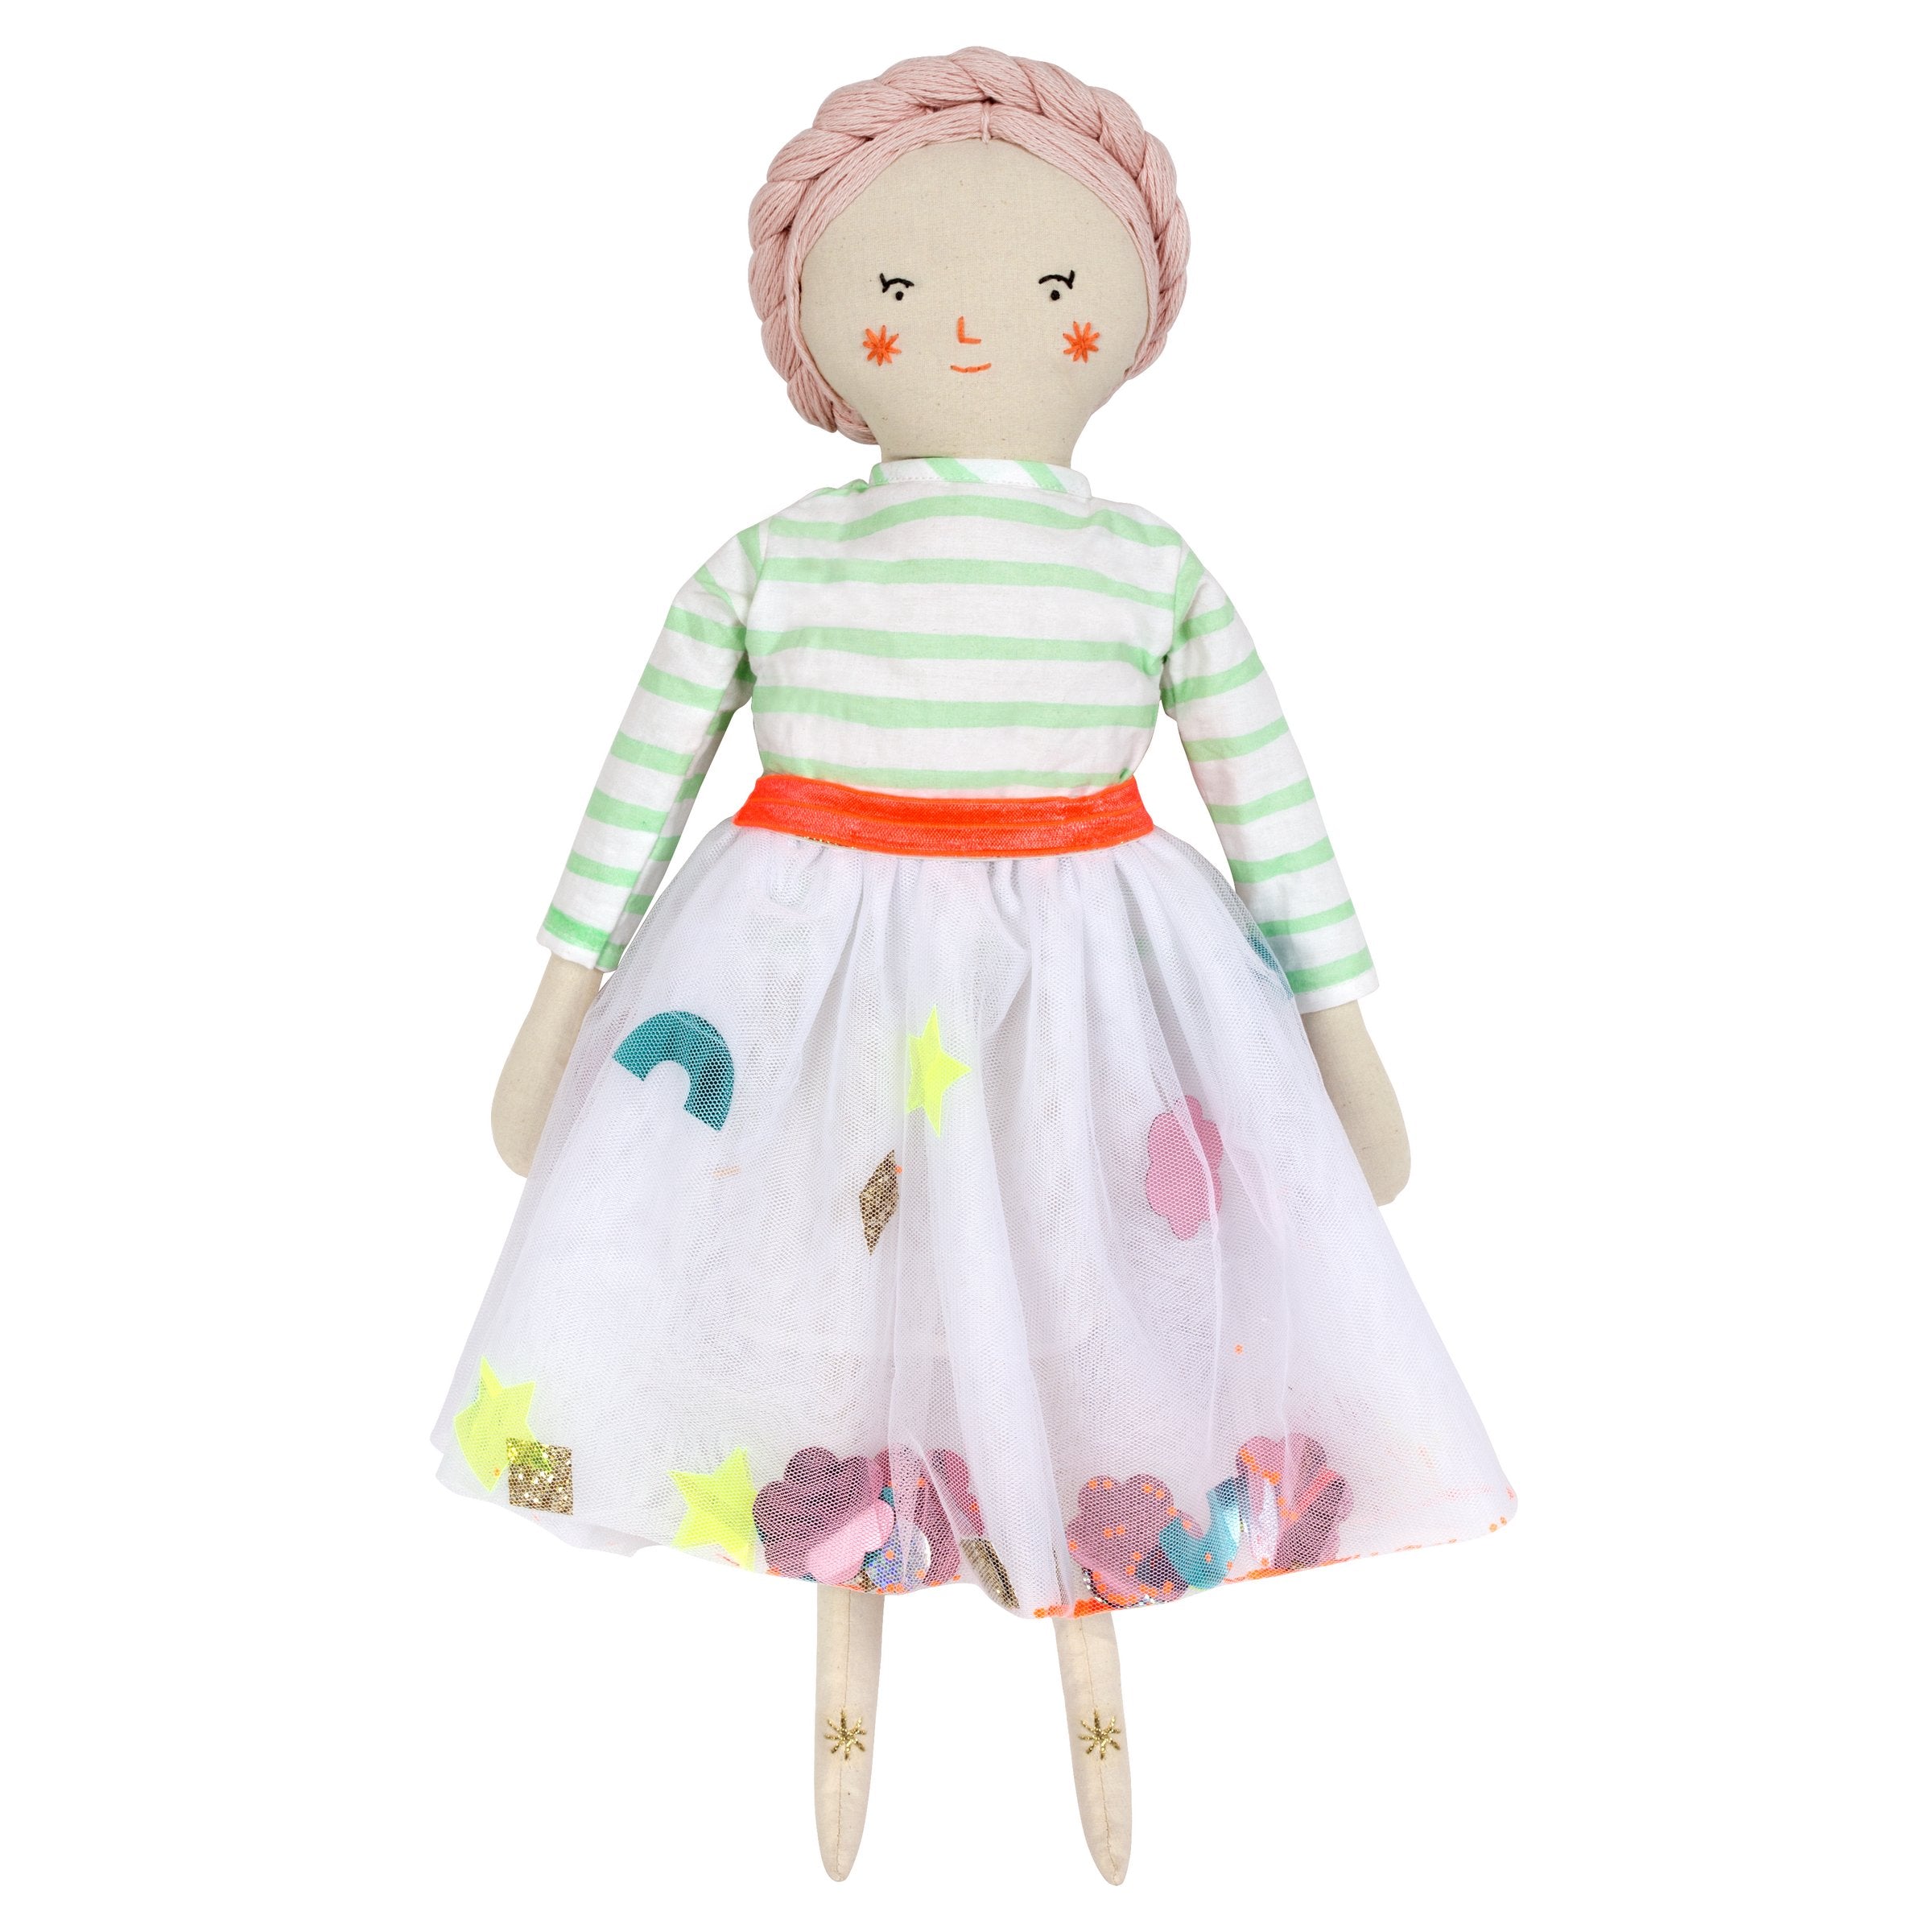 Our combination of a beautiful cotton doll and 2 suitcases for kids makes a fabulous birthday gift for kids